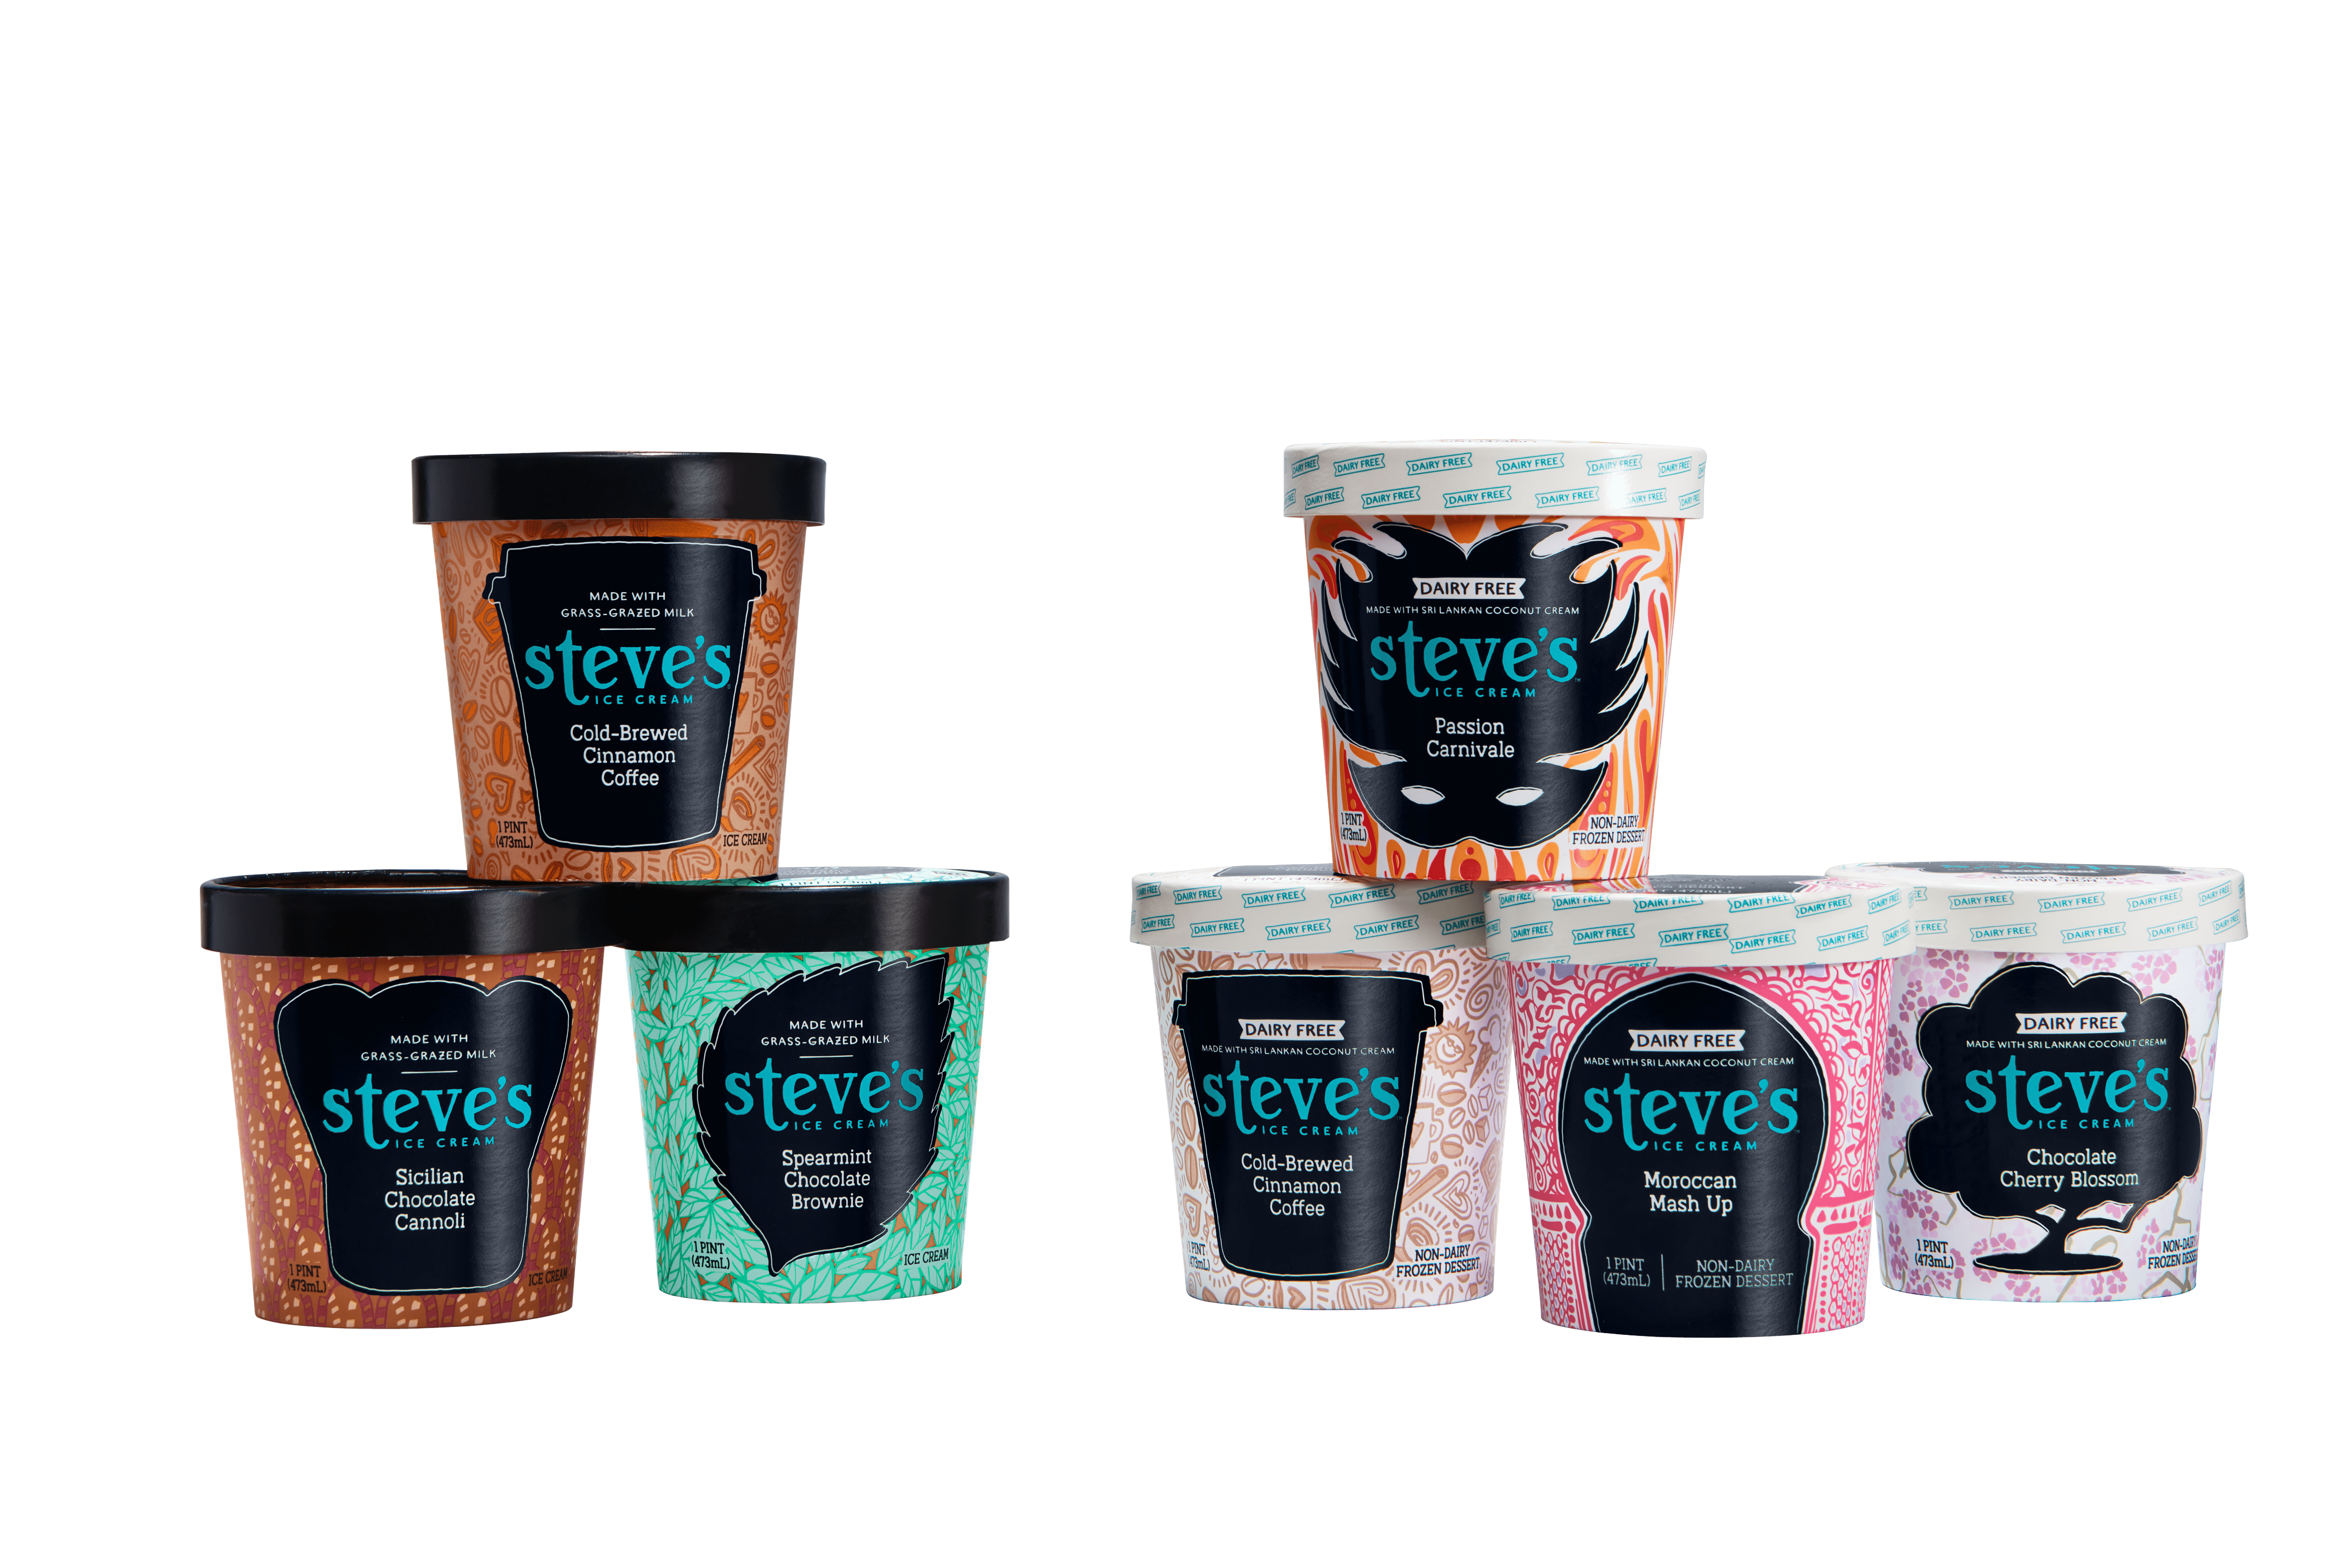 Steve’s Ice Cream embraces its craft roots with new flavors and artist-designed packaging[Image: pints of Steve's Ice Cream)